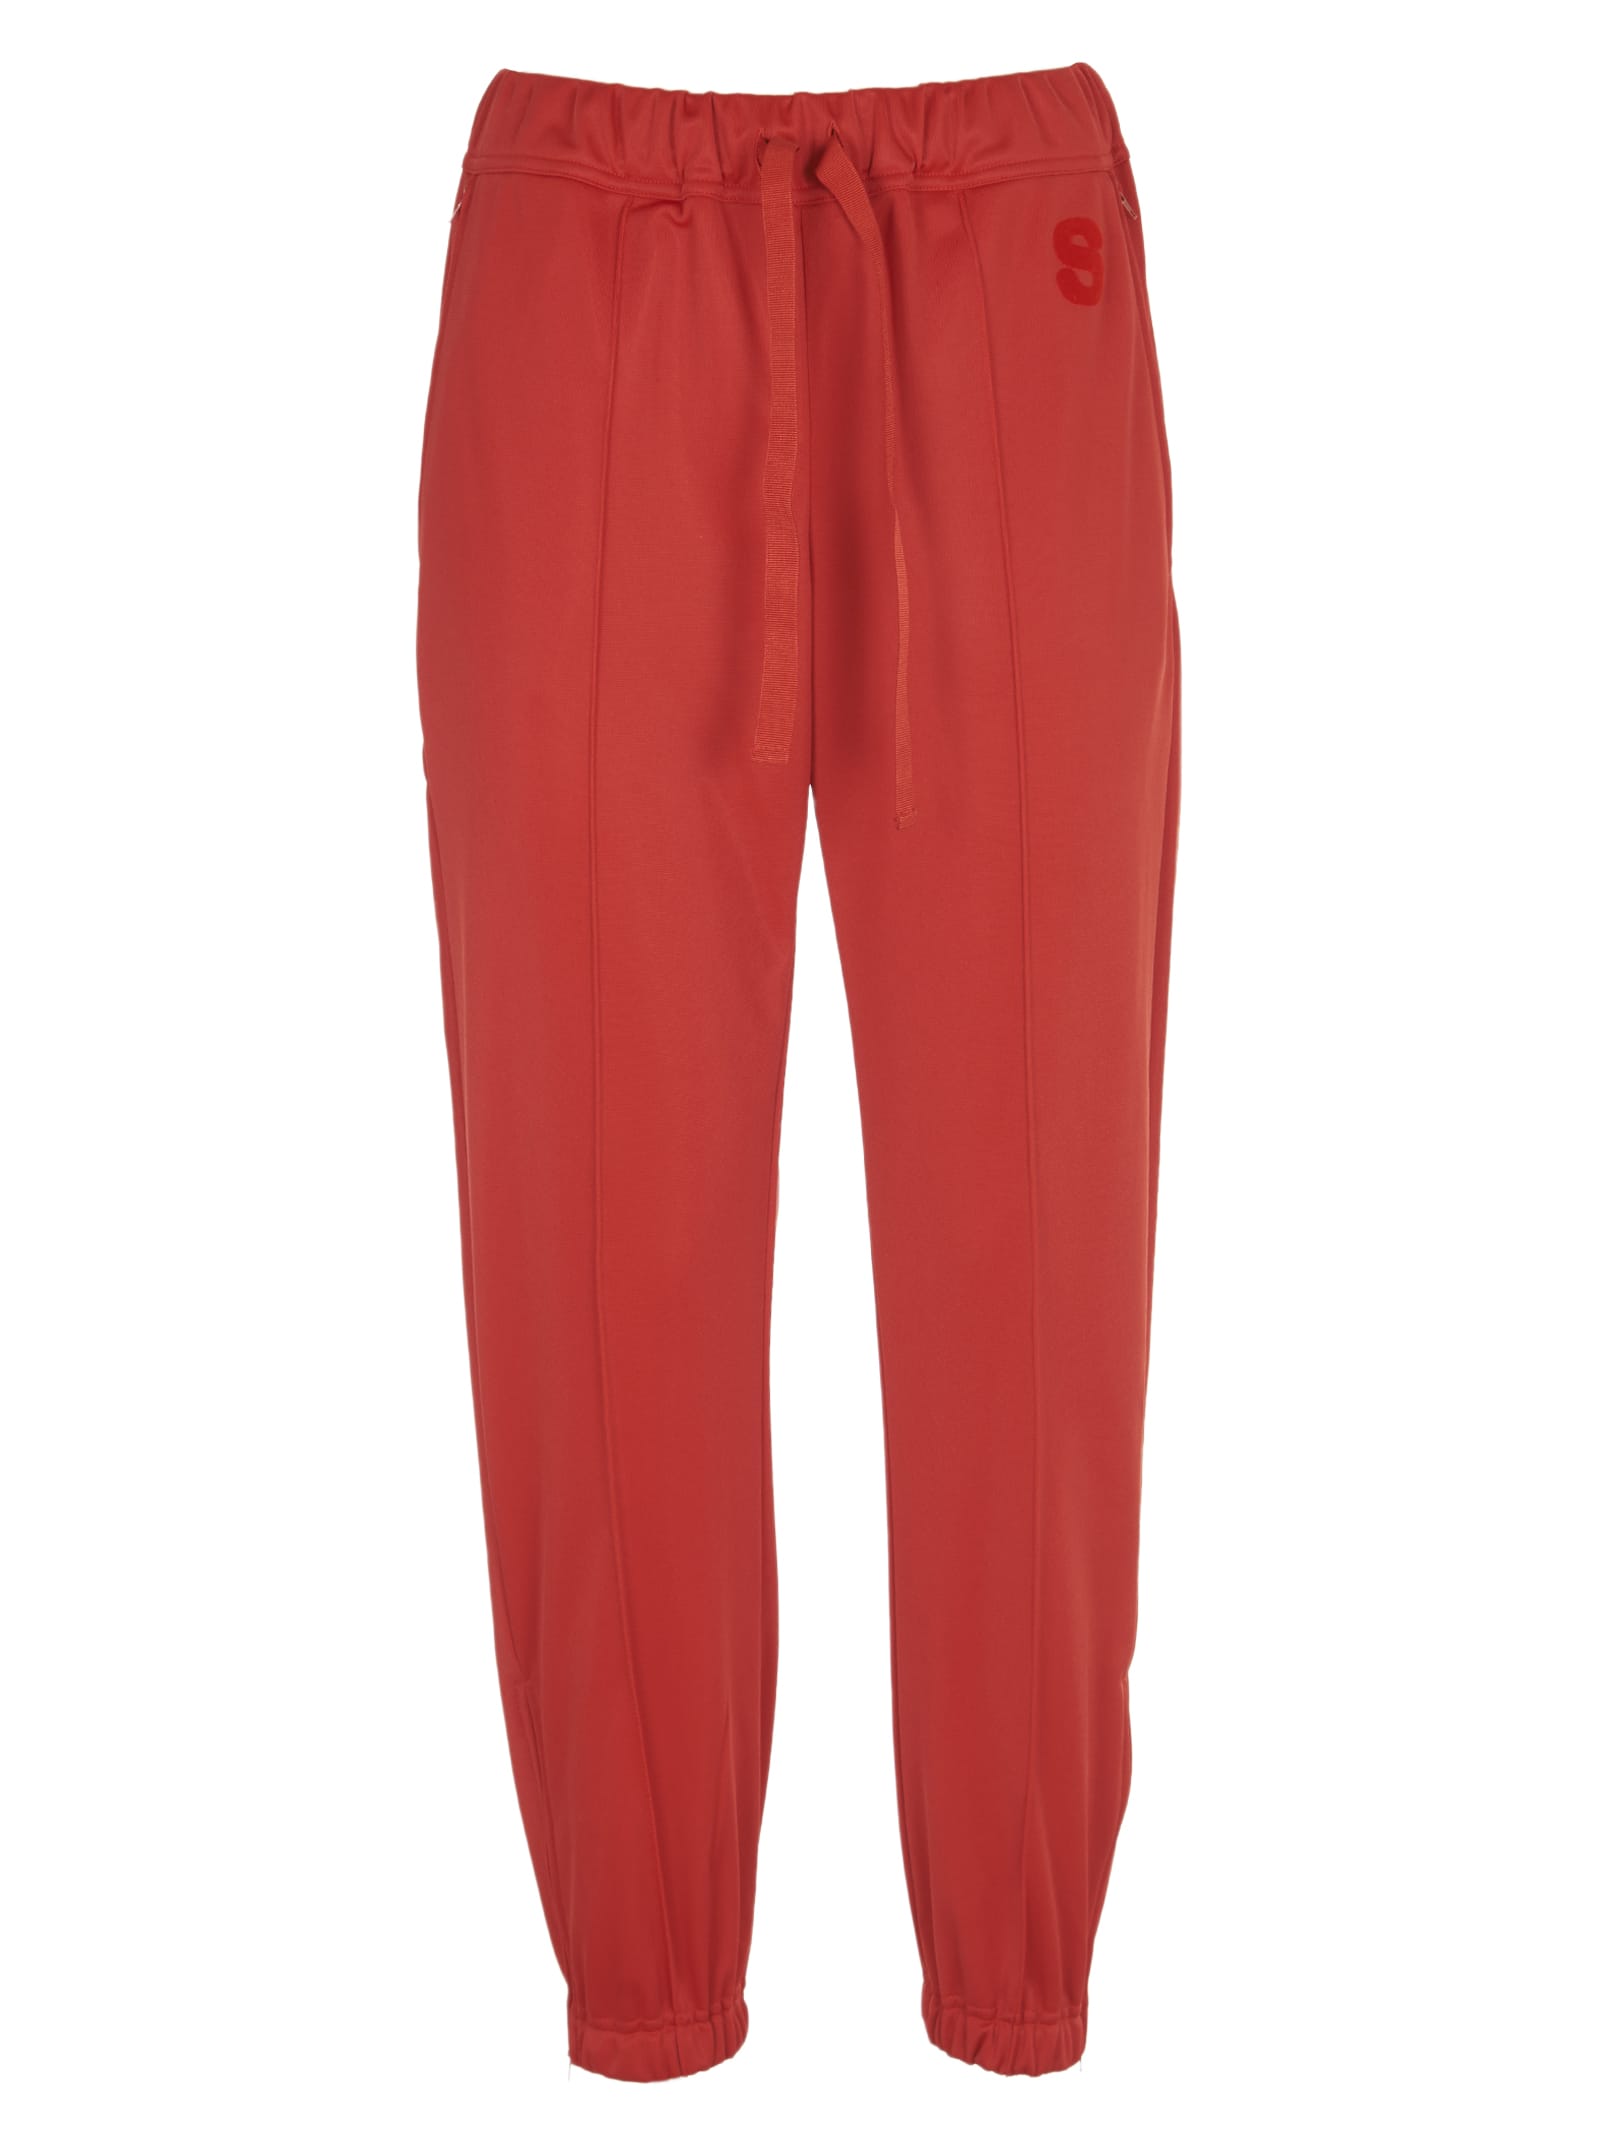 SEMICOUTURE Red Jogger